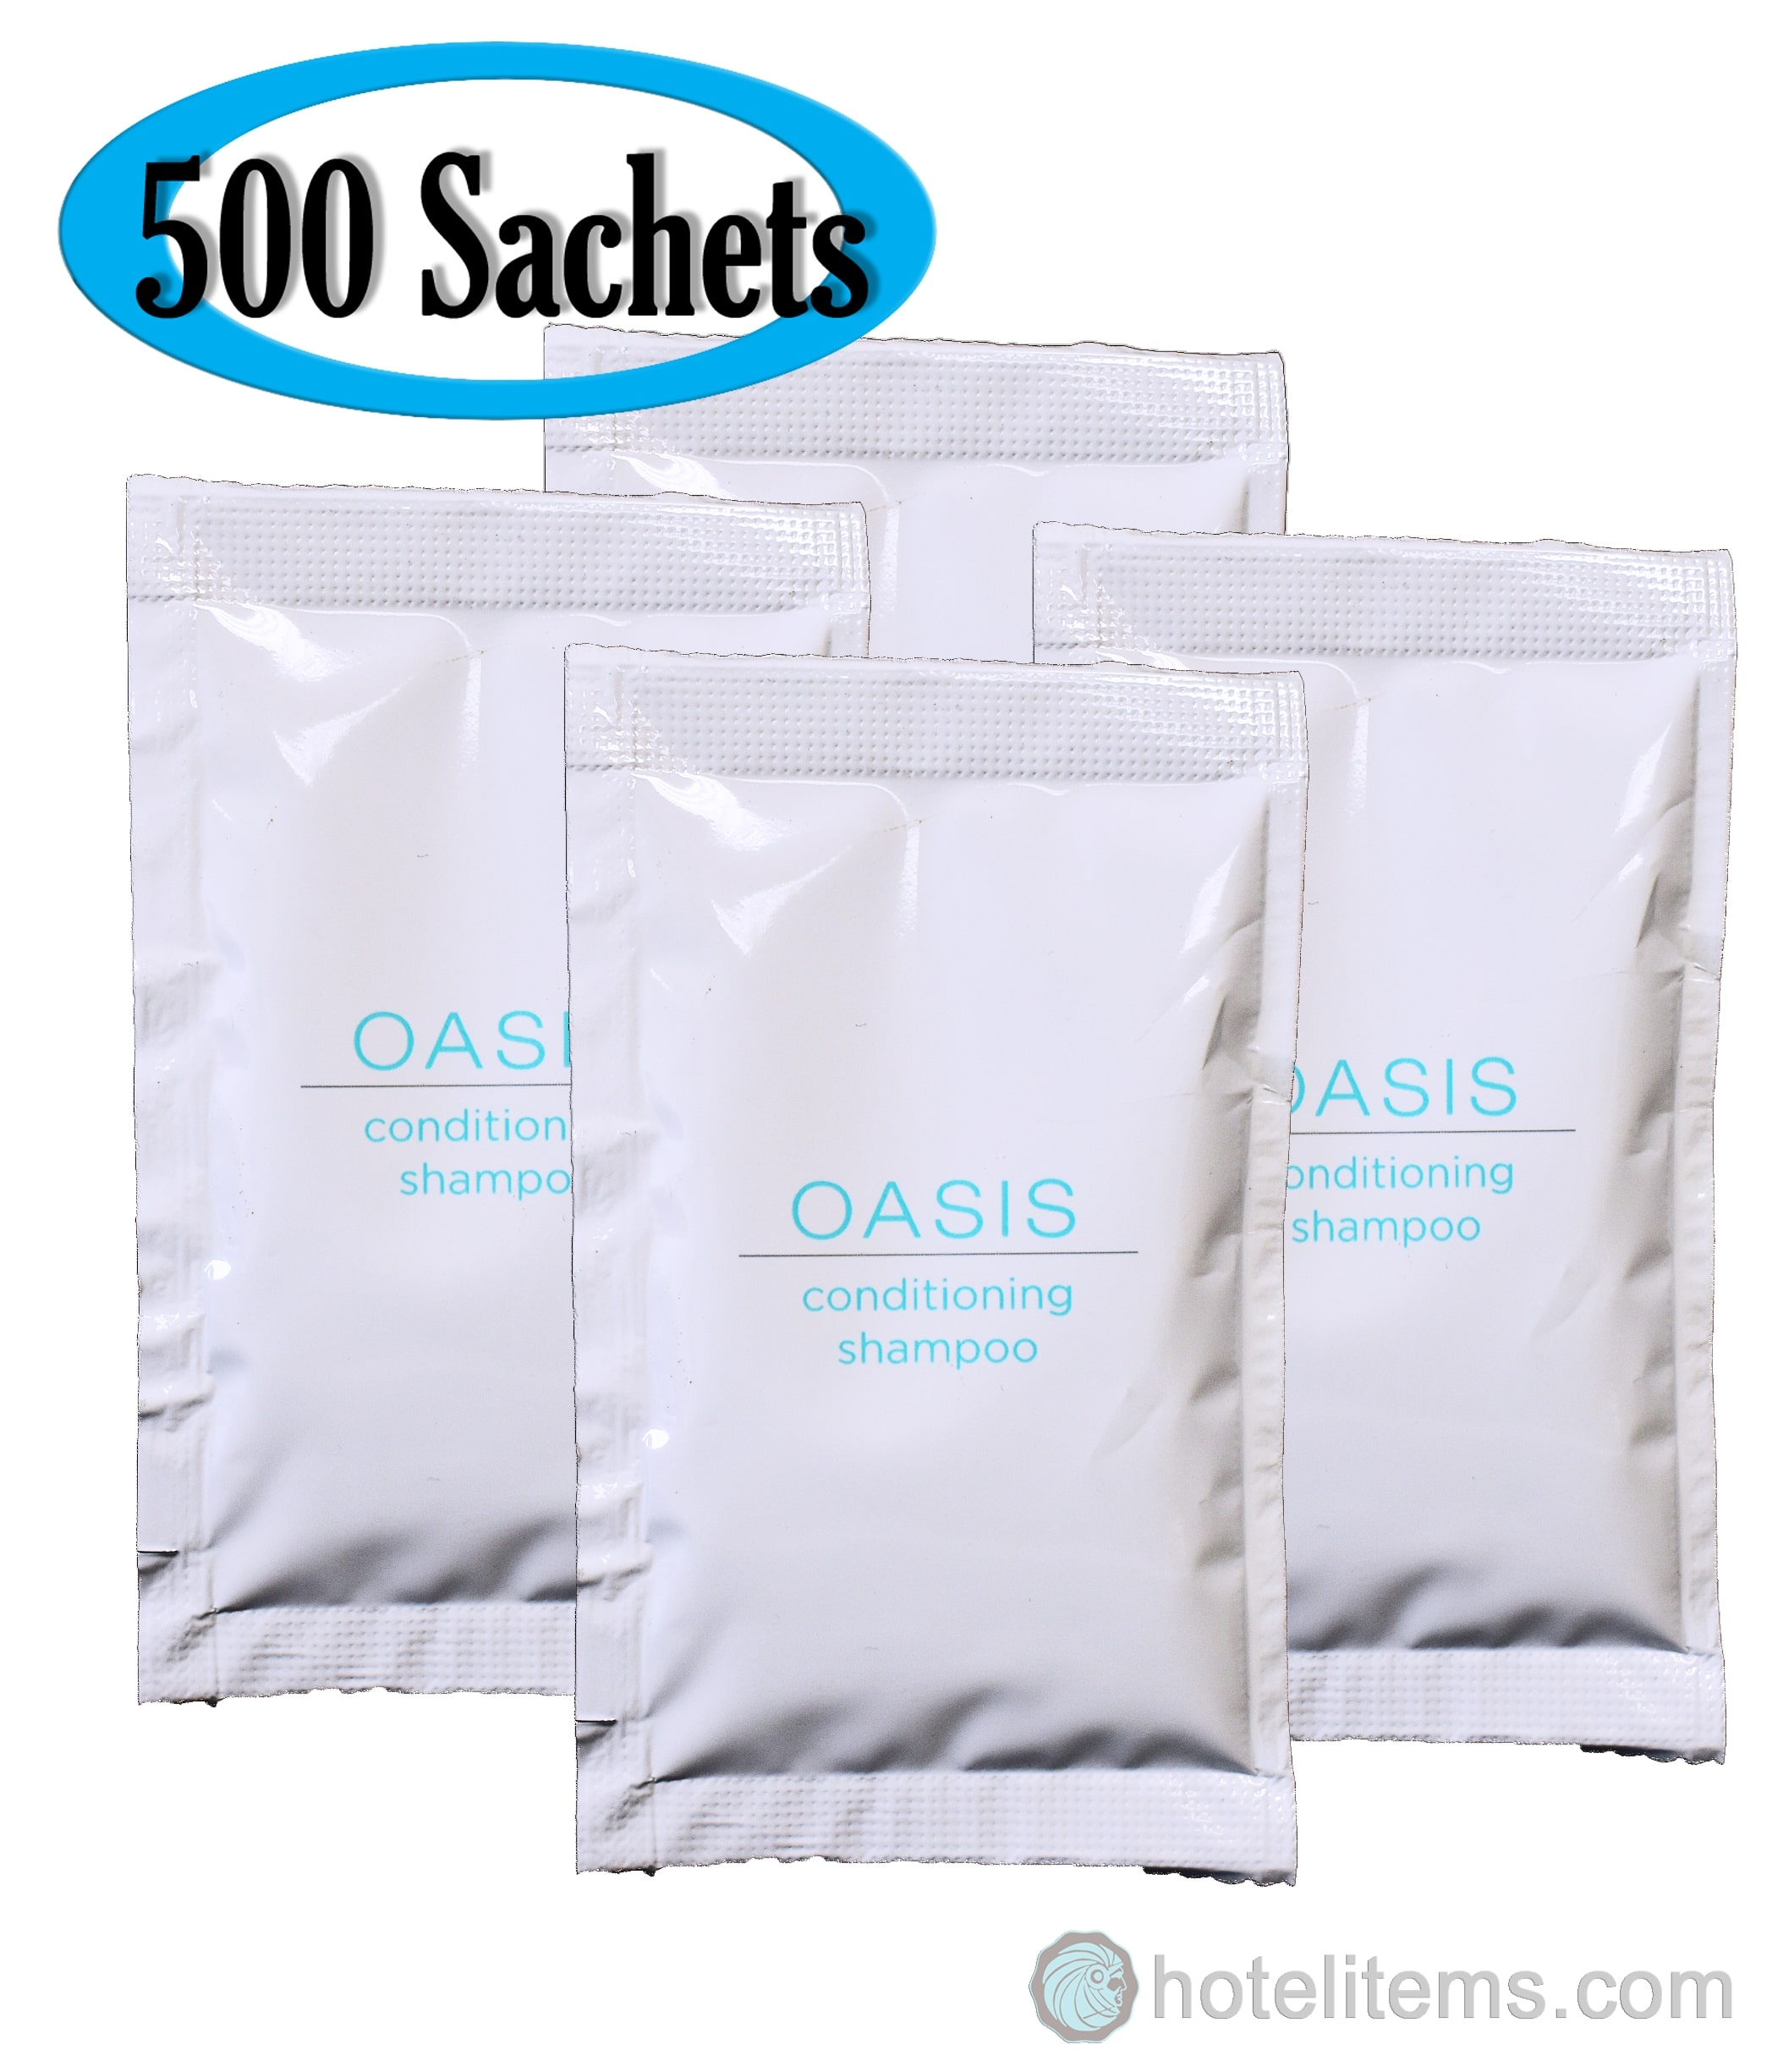 500 PACKETS OASIS or JADE HAIR SHAMPOO CONDITIONING 0.34 oz PACKET HOTEL/TRAVEL 